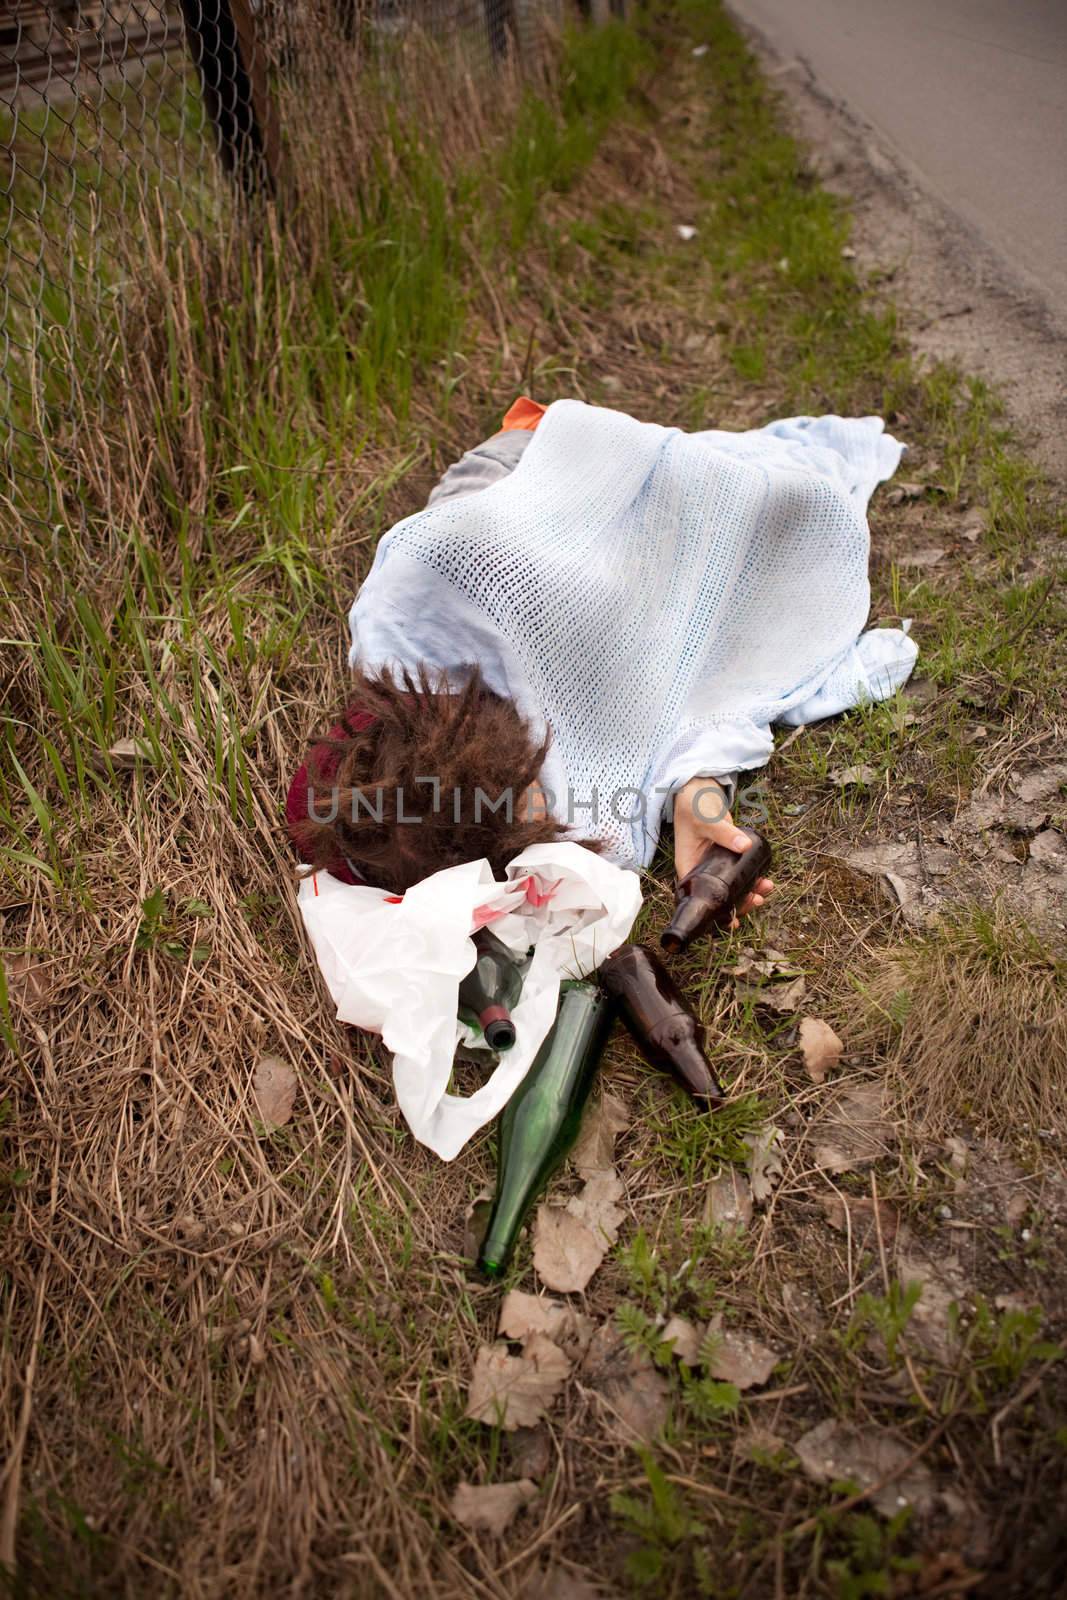 A homeless person sleeping in the ditch